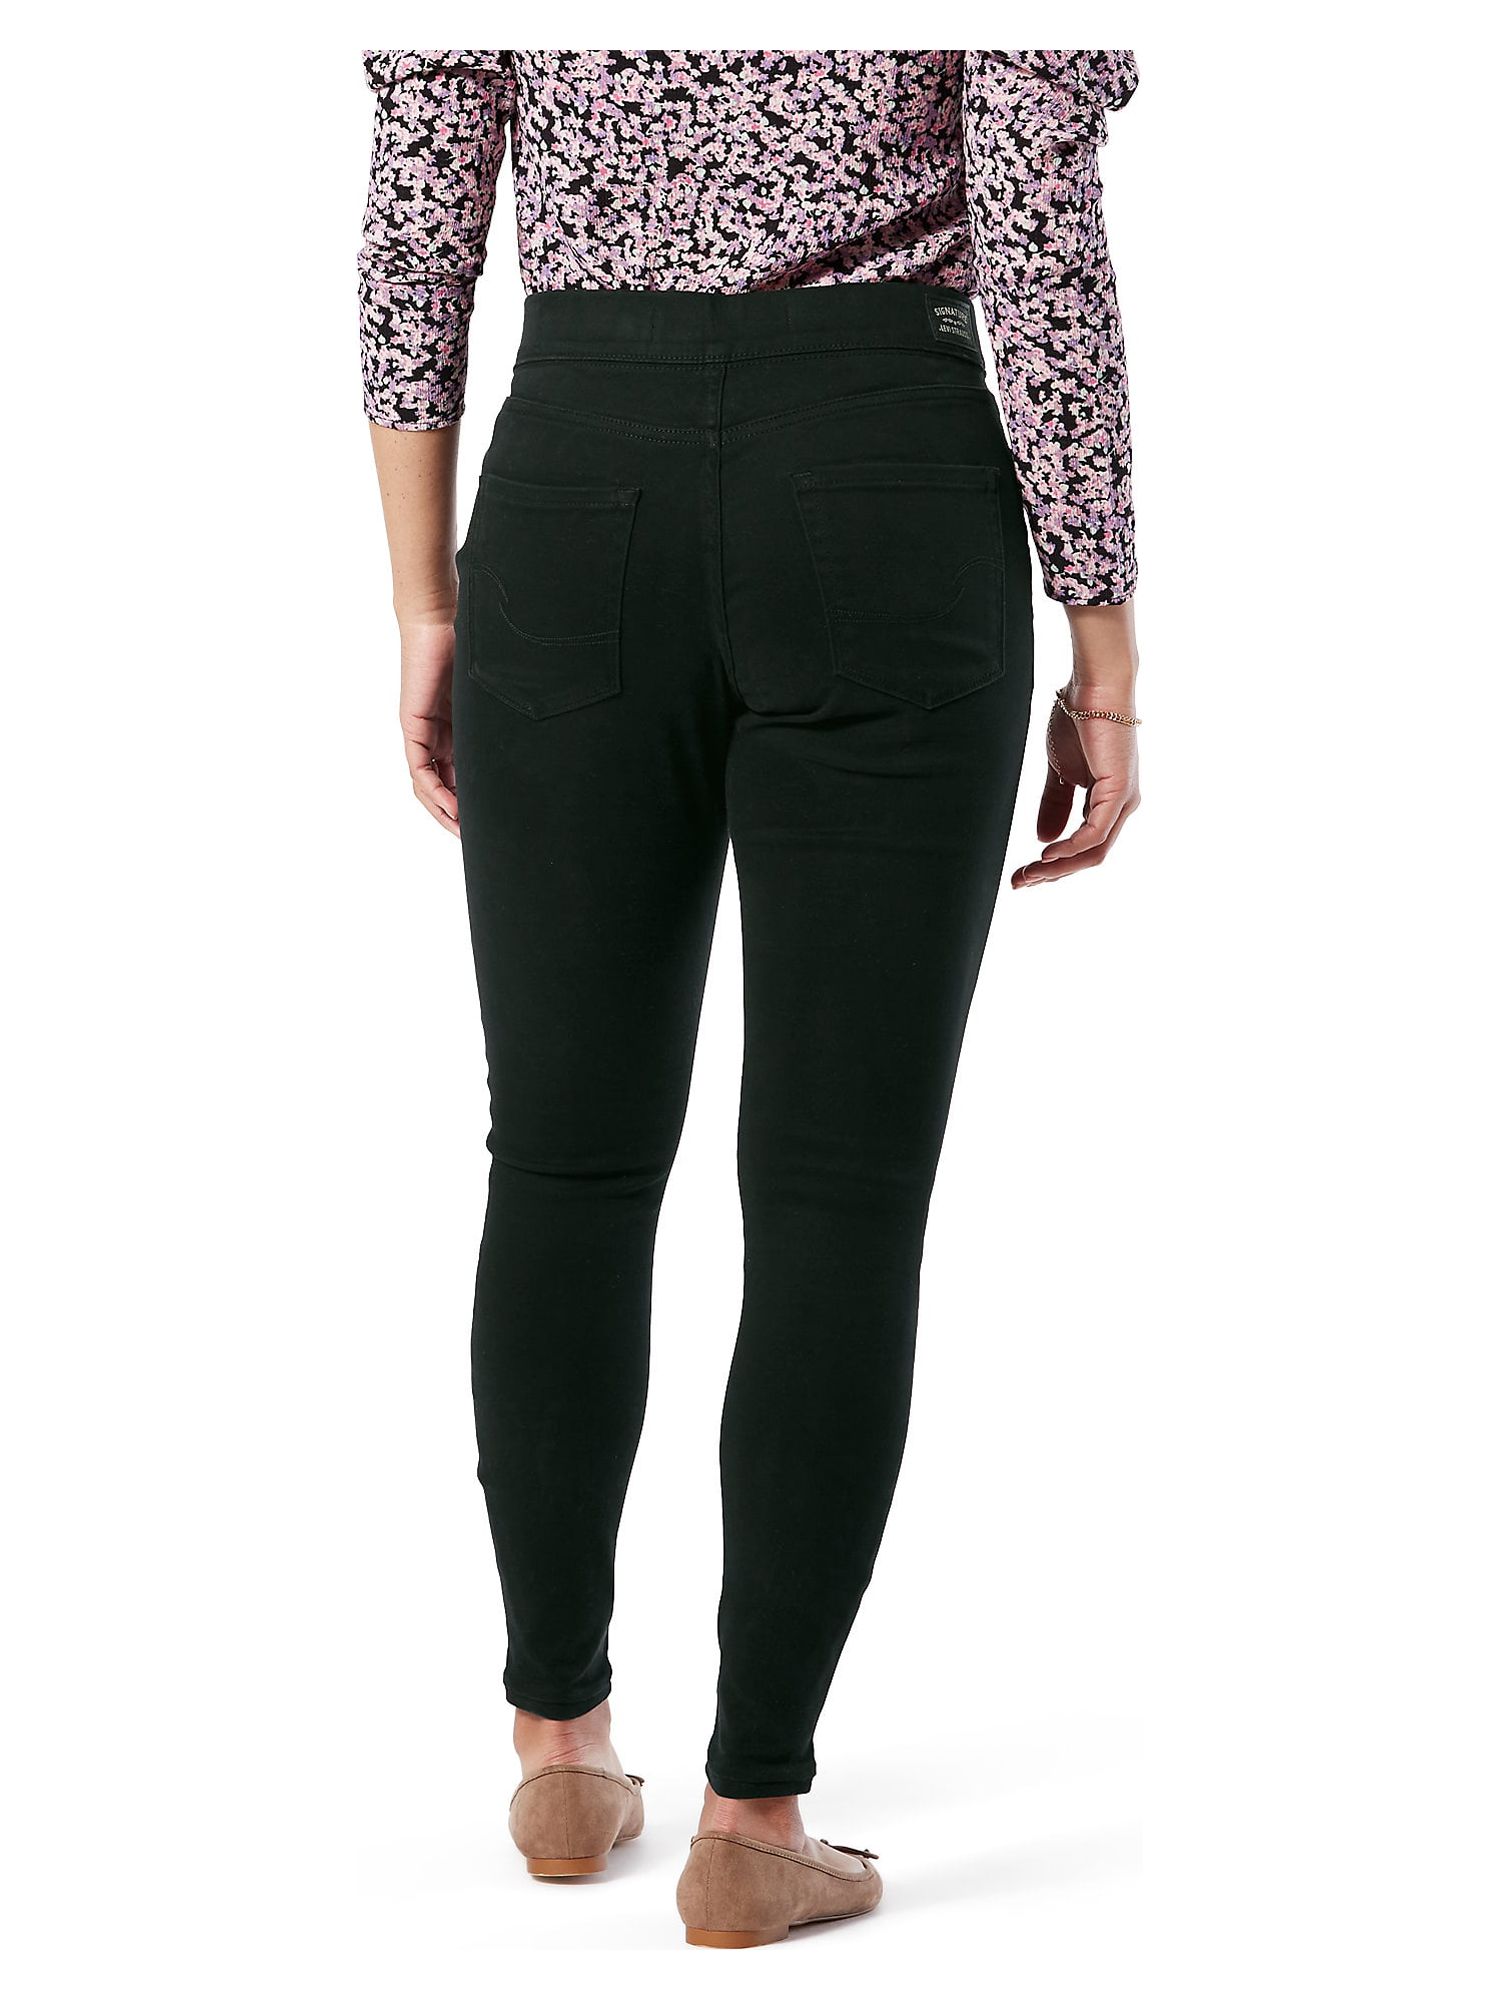 Signature by Levi Strauss & Co. Women's Simply Stretch Shaping Pull-On Super Skinny Jeans - image 2 of 6